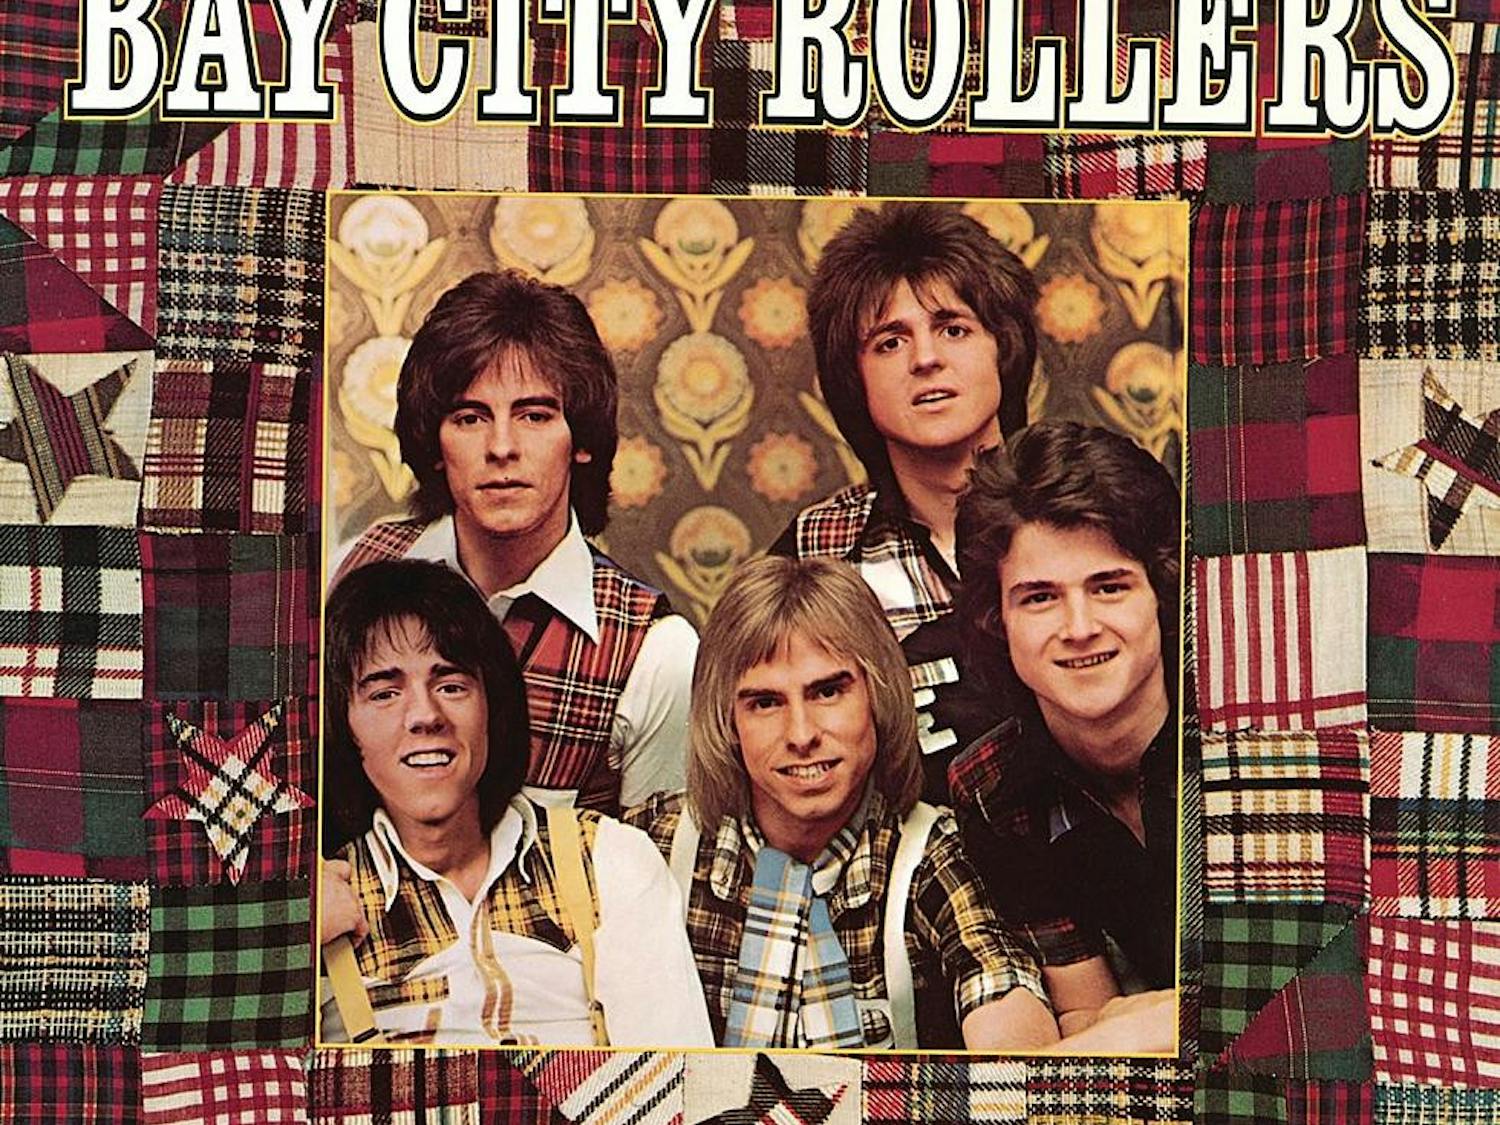 bay-city-rollers